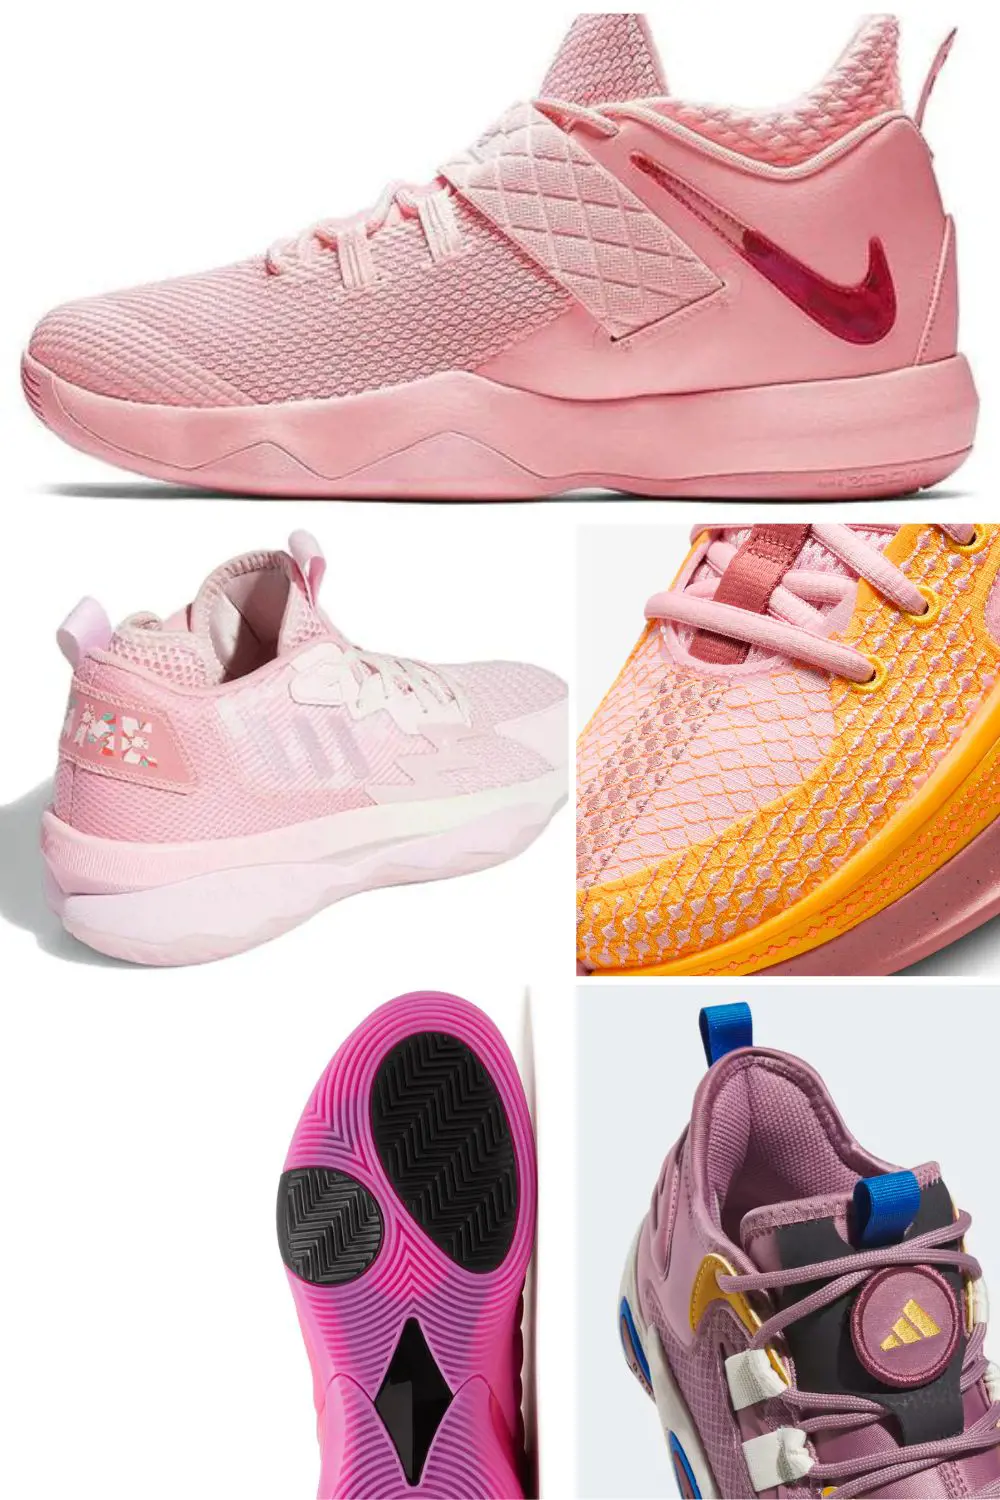 Exciting Pink Basketball Shoes For This Season